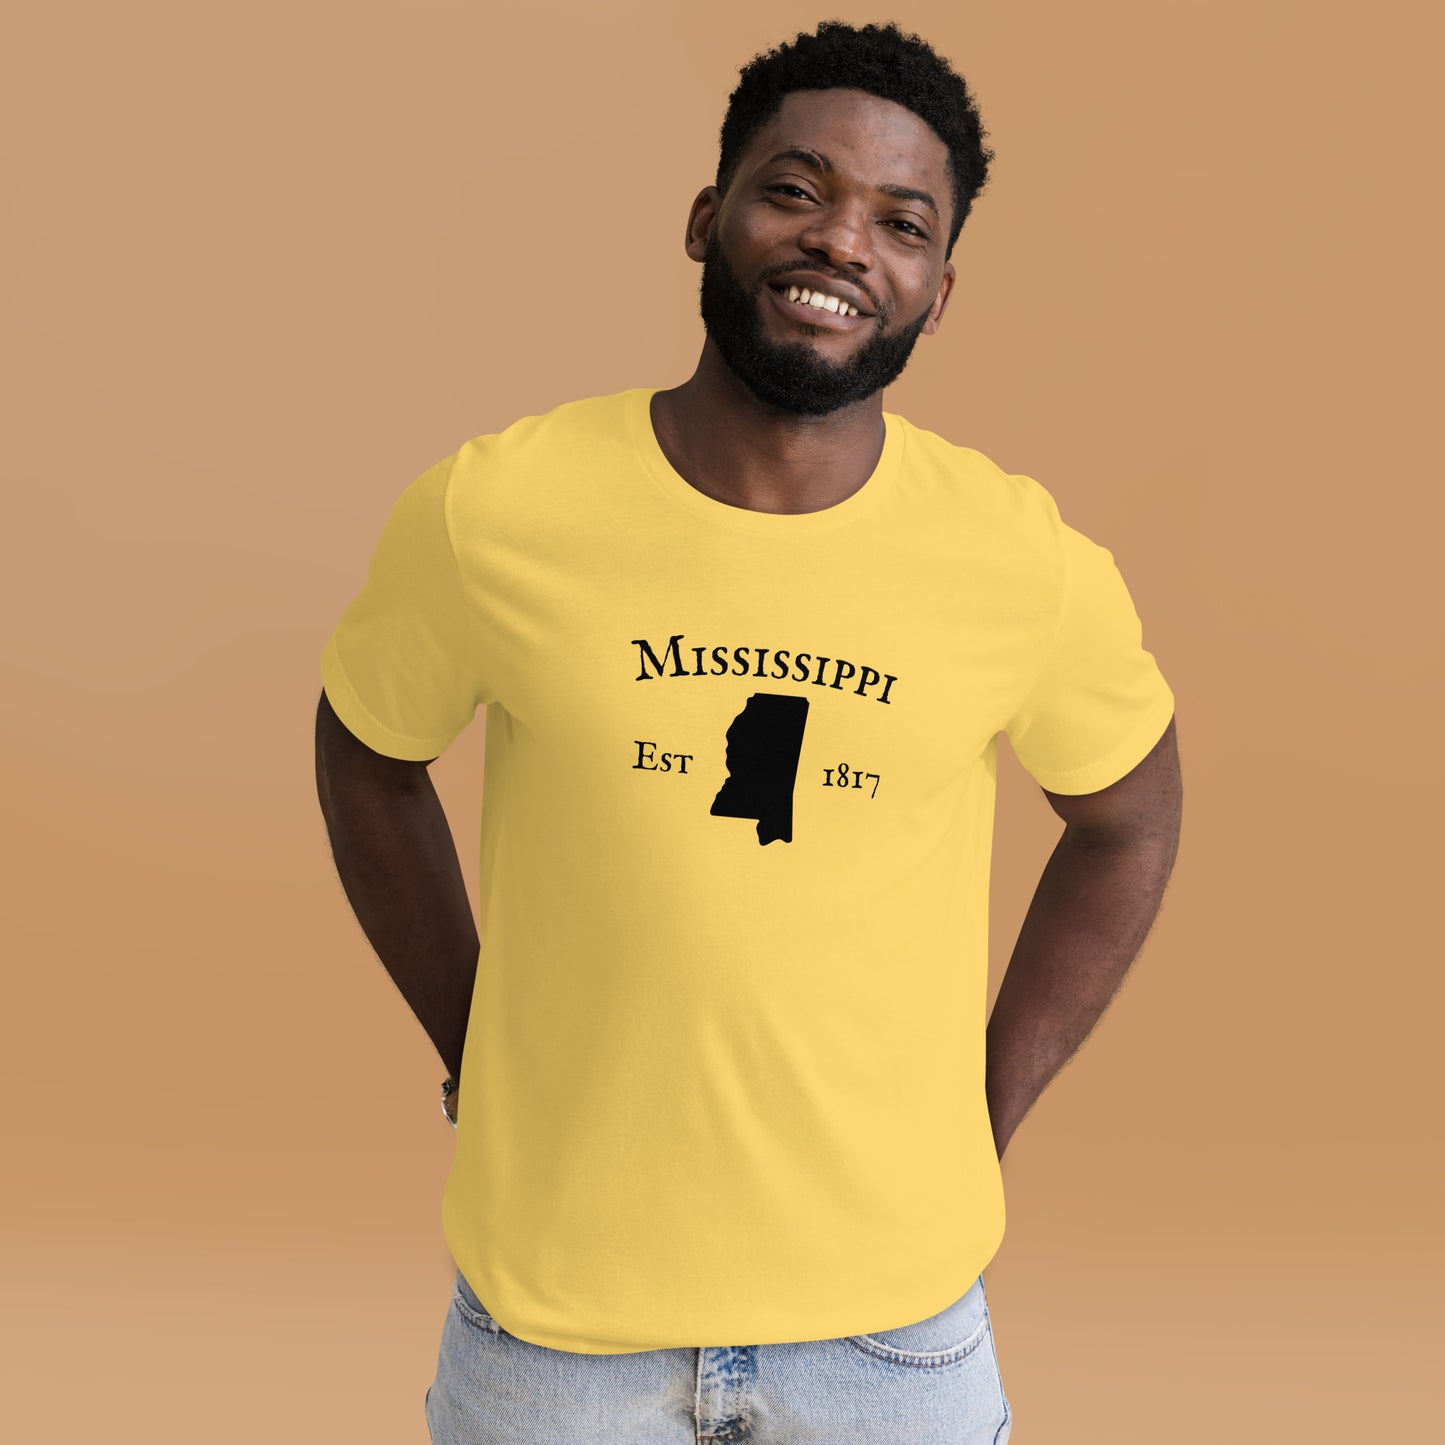 "Mississippi Established In 1817" T-Shirt - Weave Got Gifts - Unique Gifts You Won’t Find Anywhere Else!